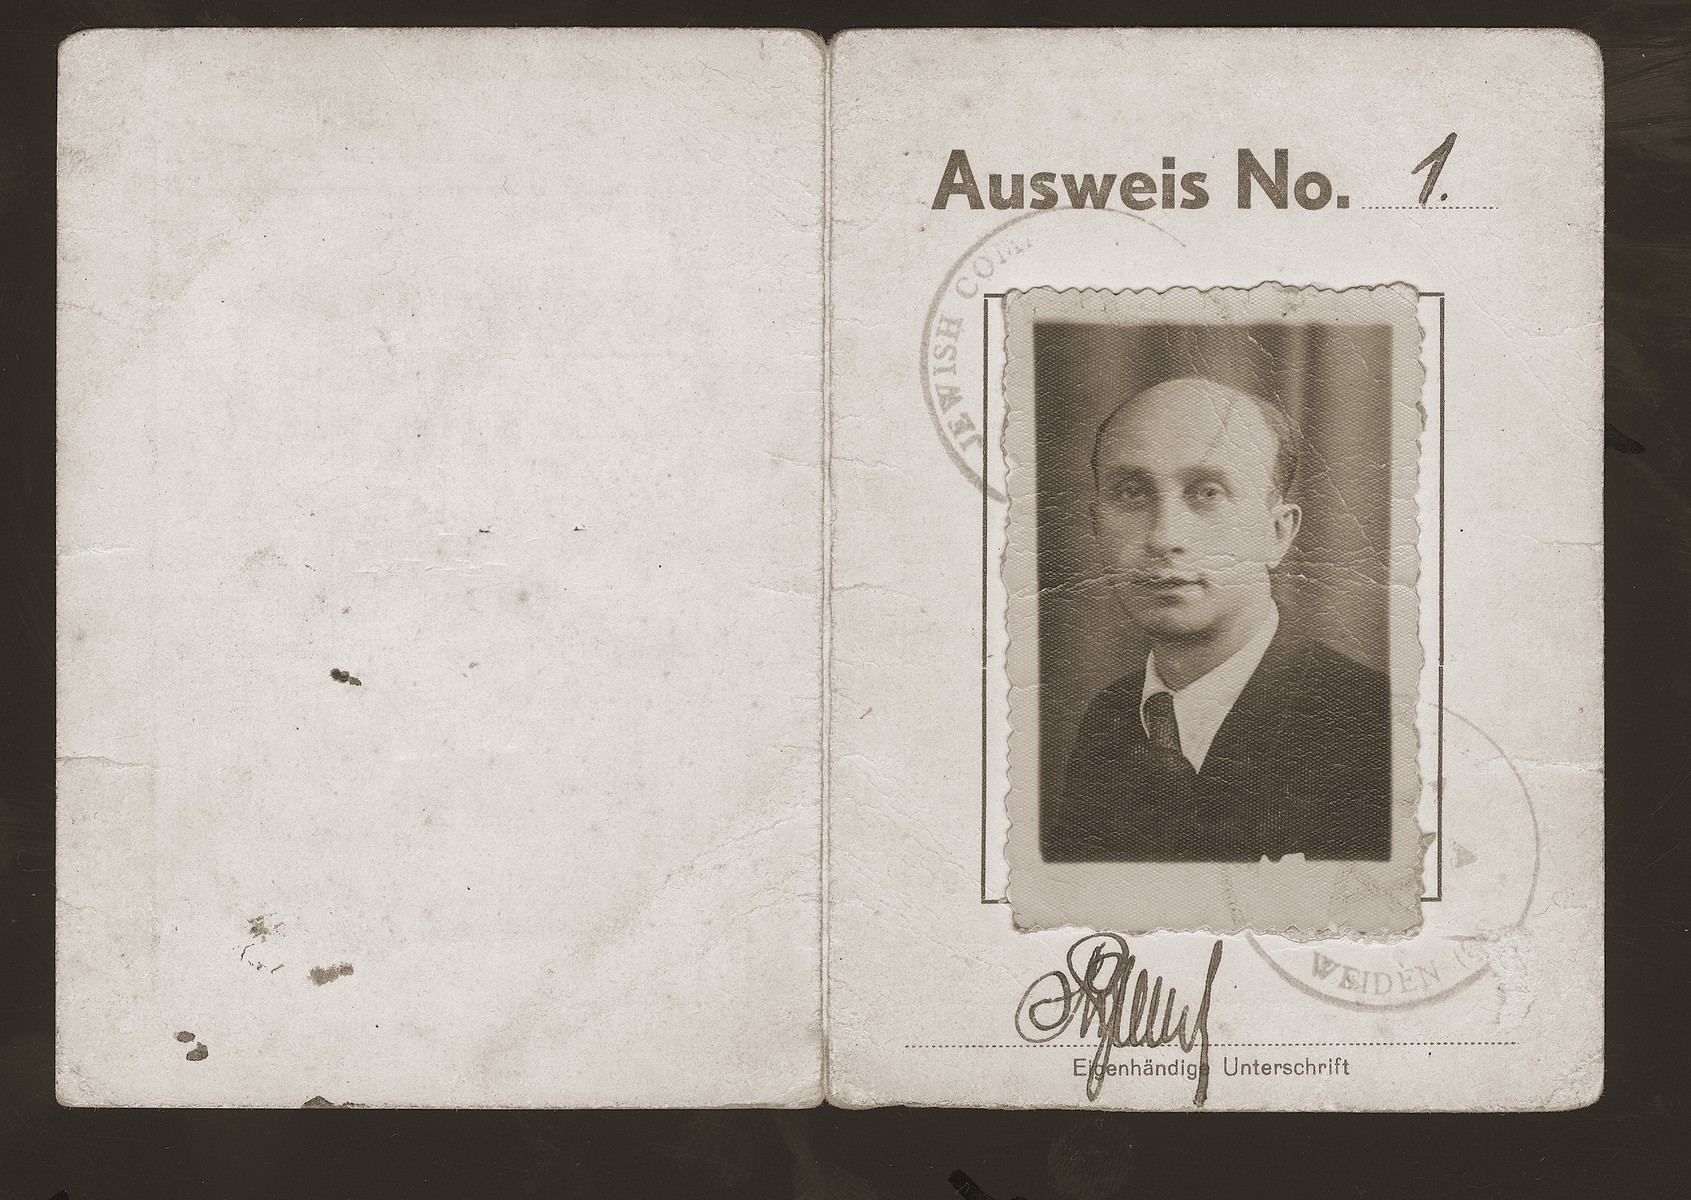 An identification card of Mates Billauer issued by the Military Government in Weiden.